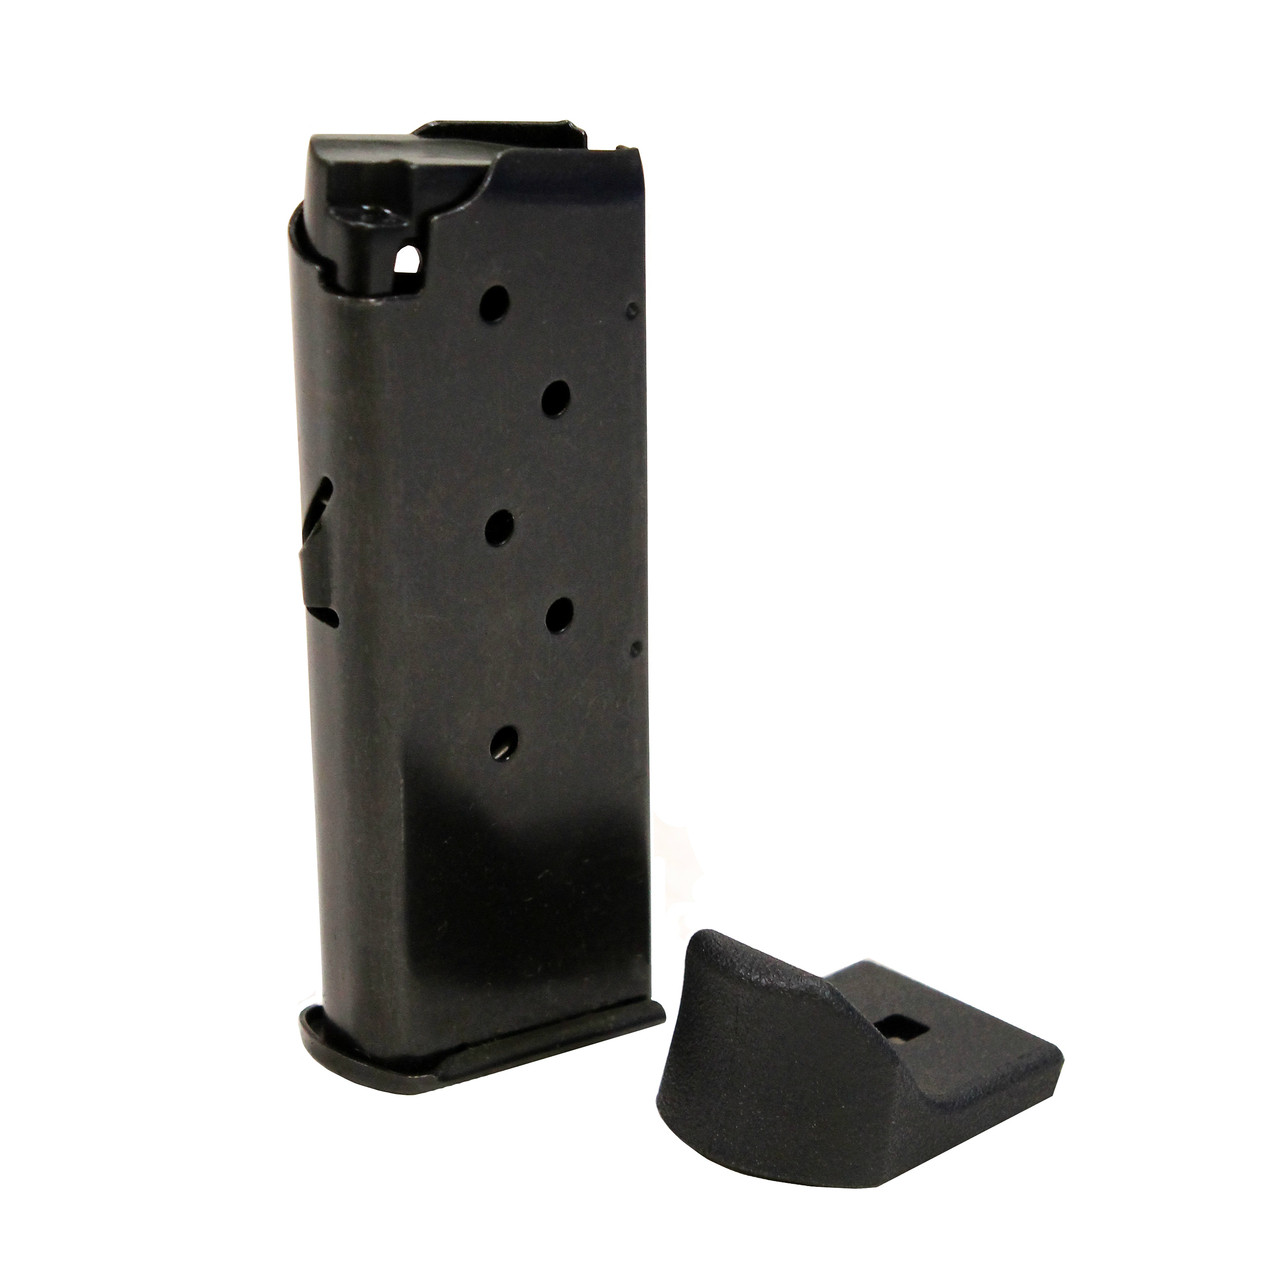 R161 .380acp Factory OEM 6rd Magazines Mags Clips Remington RM-380 Details about   3 